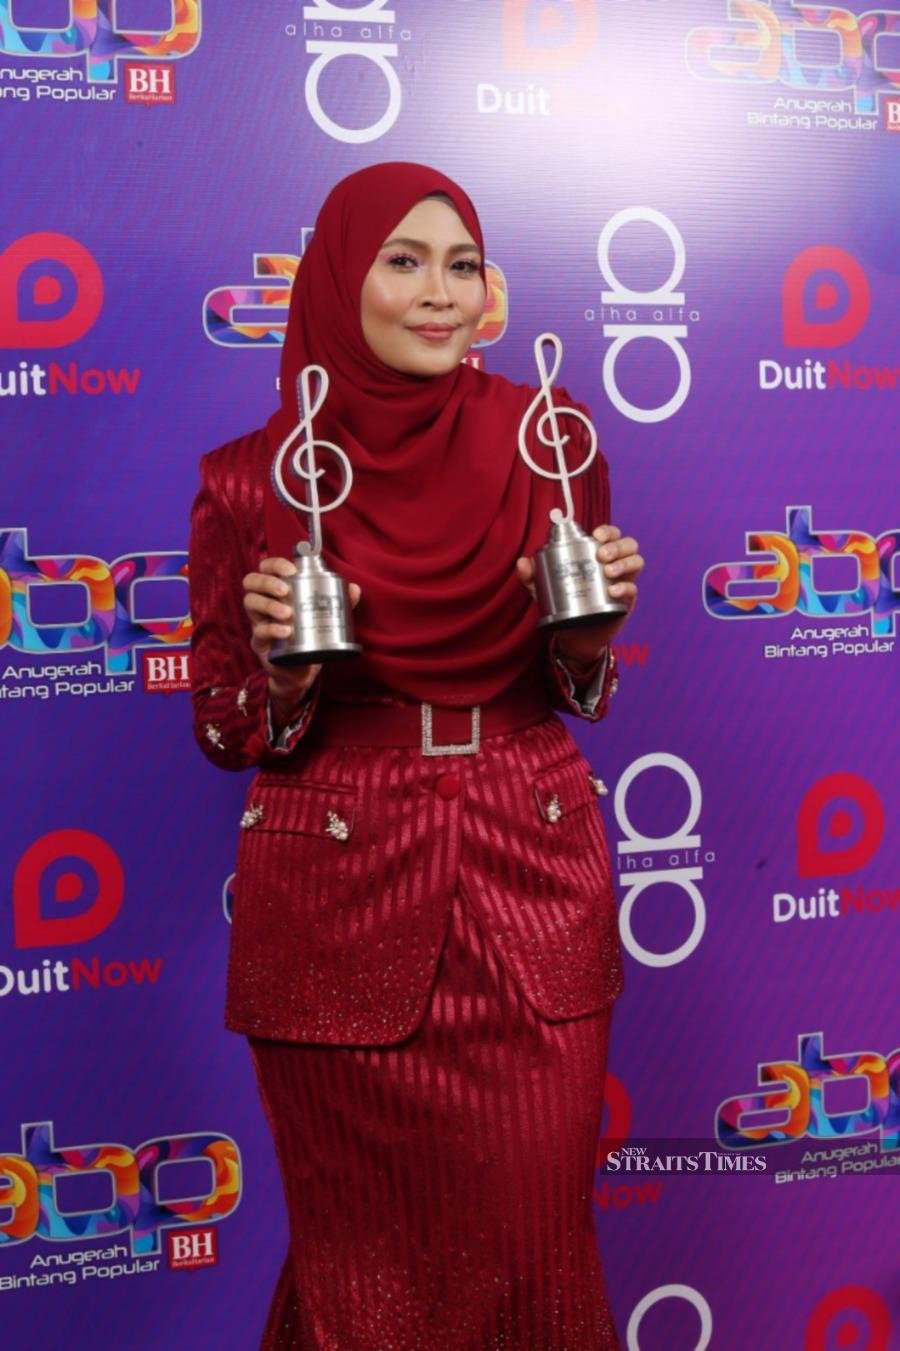 Actress and television host Siti Nordiana. - NSTP/SURIANIE MOHD HANIF